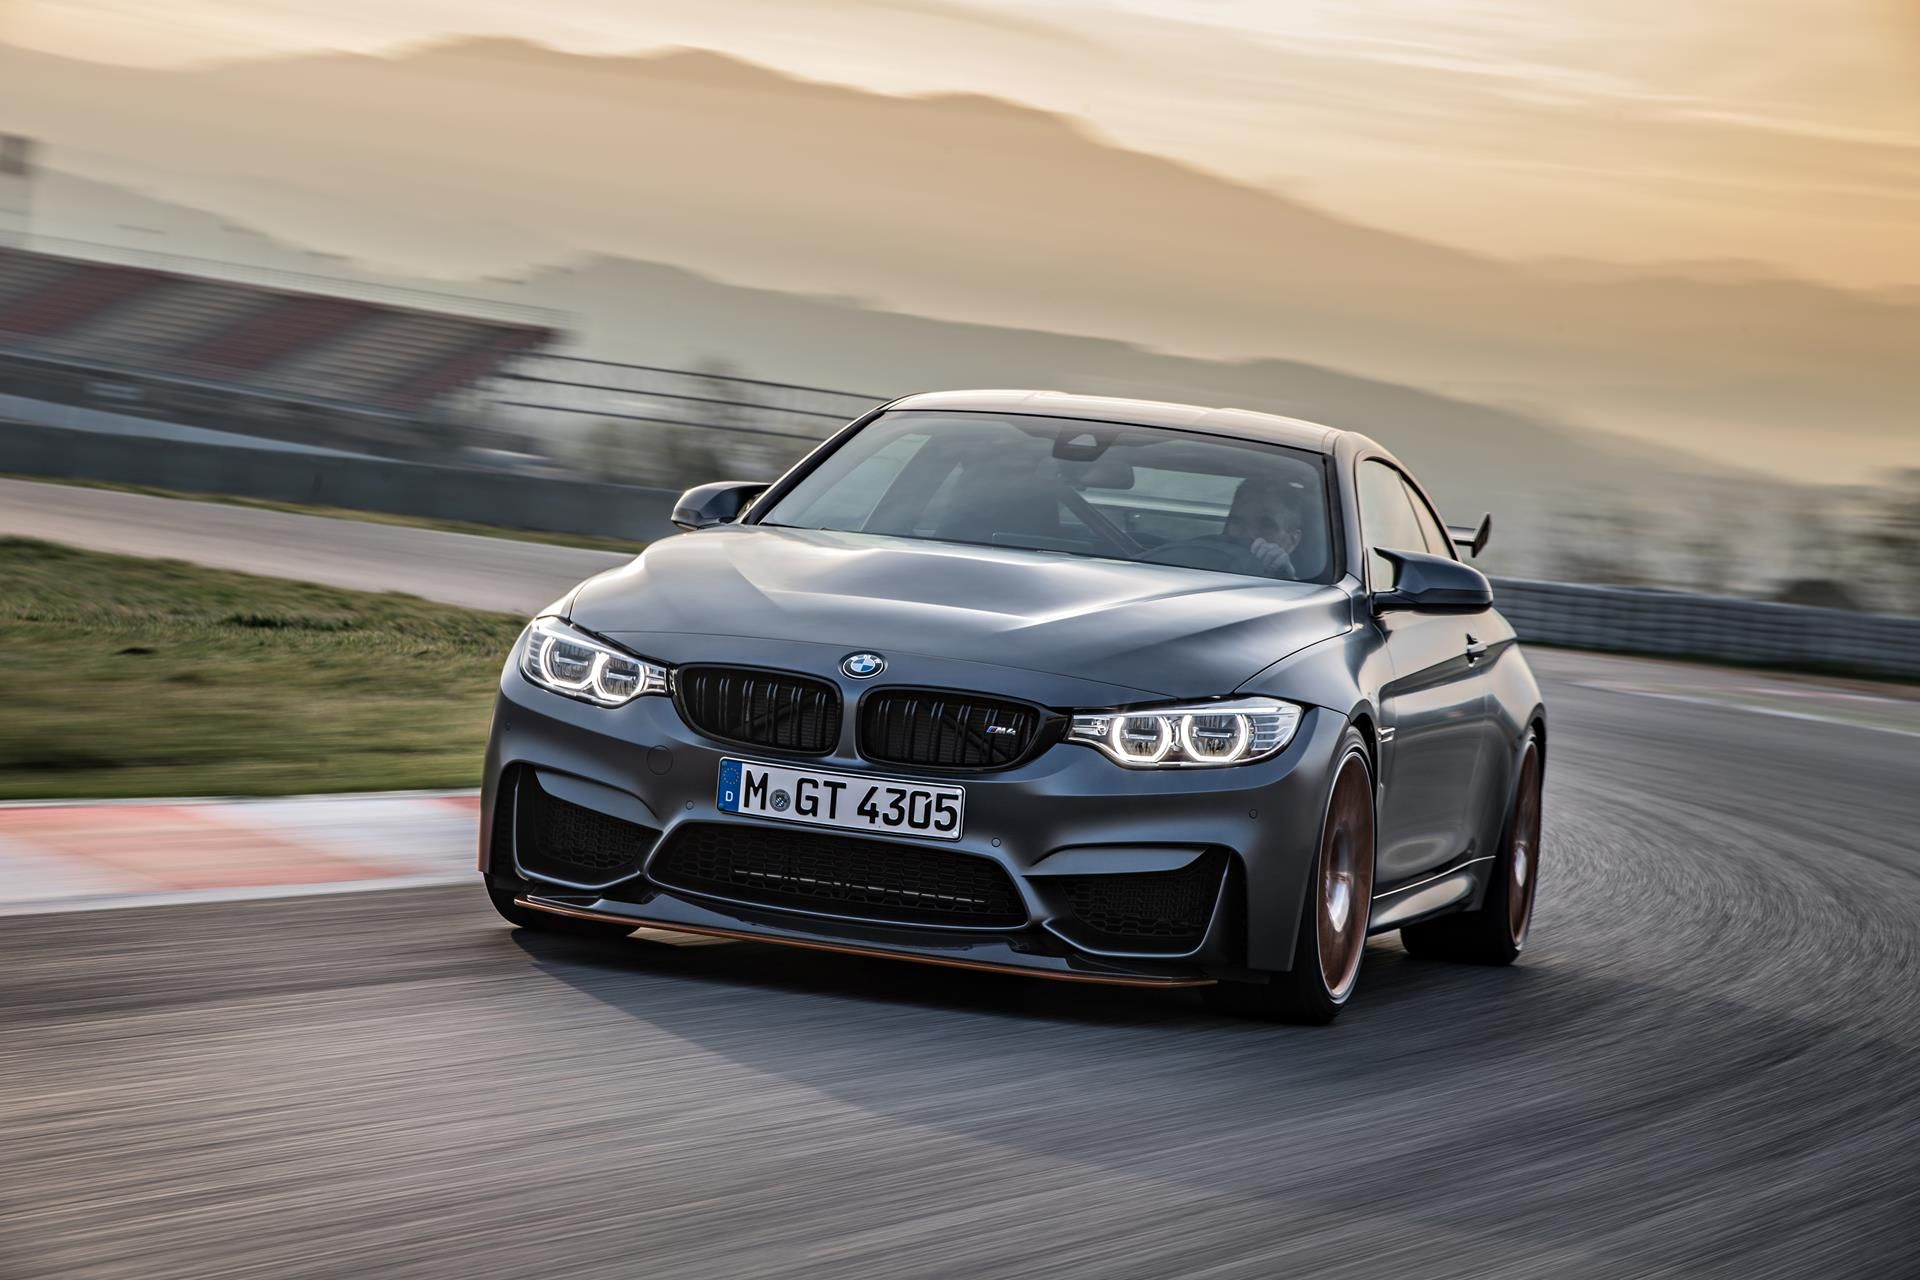 BMW M4 GTS Wallpaper and Image Gallery - .com